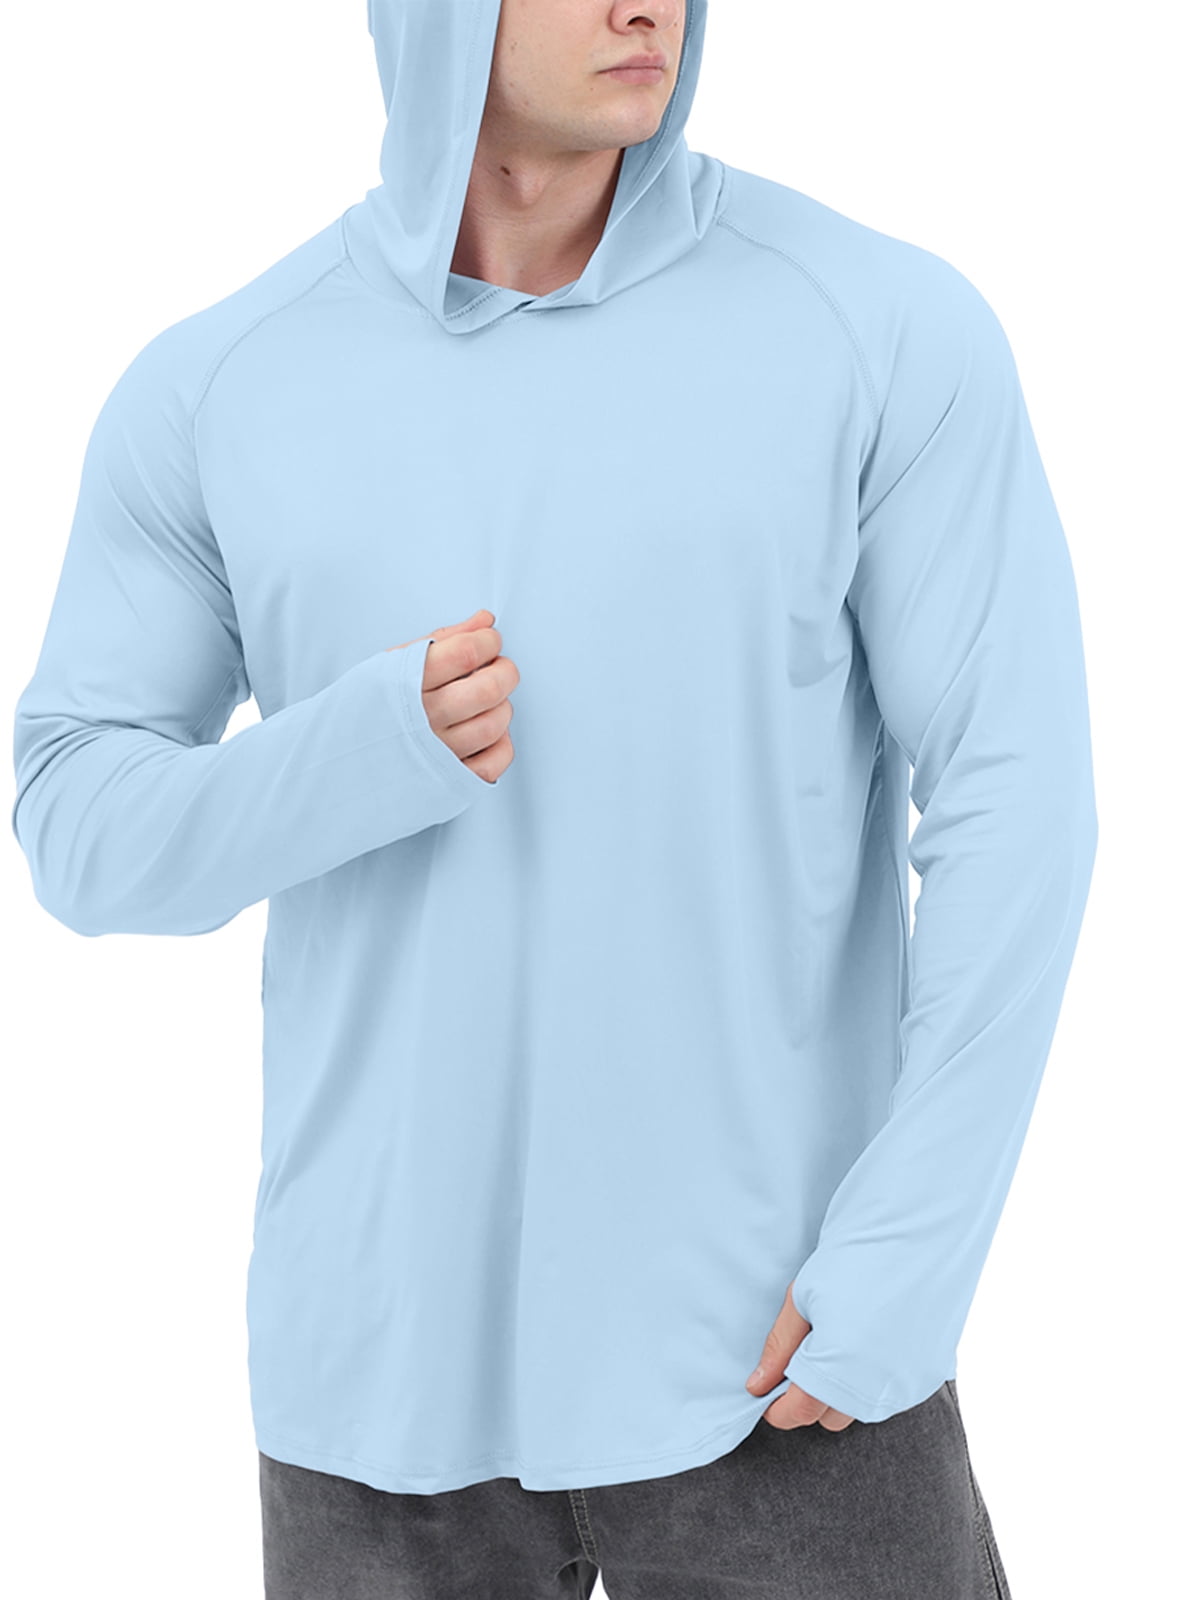 Inadays Men's UPF 50+ Sun Protection Hoodie Shirts Long Sleeve